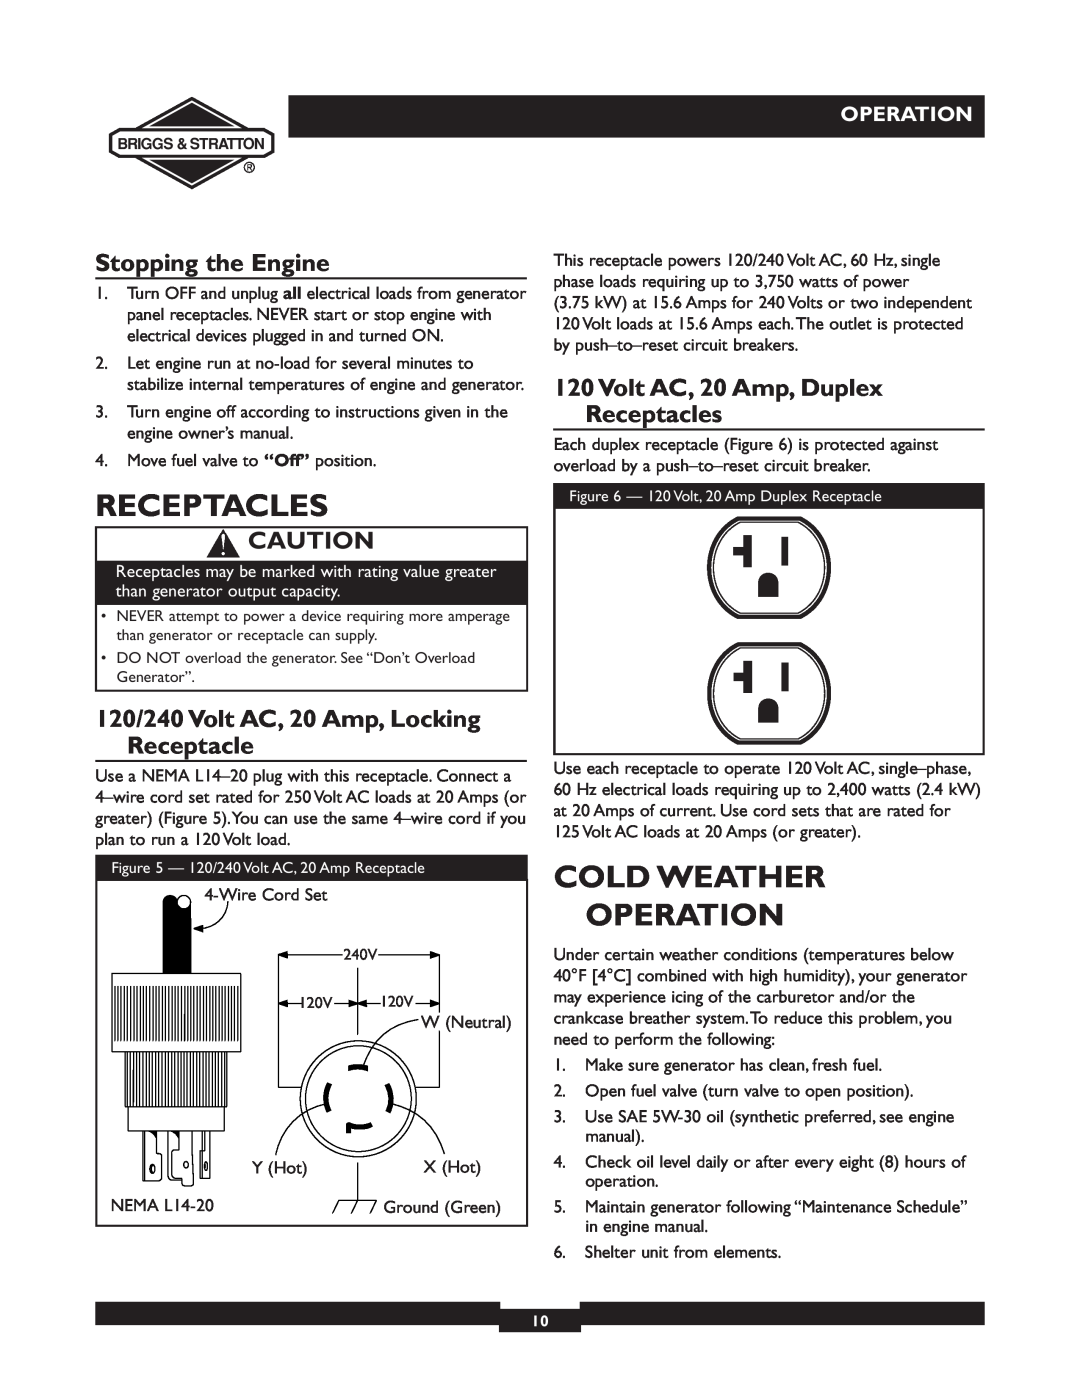 Briggs & Stratton 30238 owner manual Cold Weather Operation, Stopping the Engine, Volt AC, 20 Amp, Duplex Receptacles 